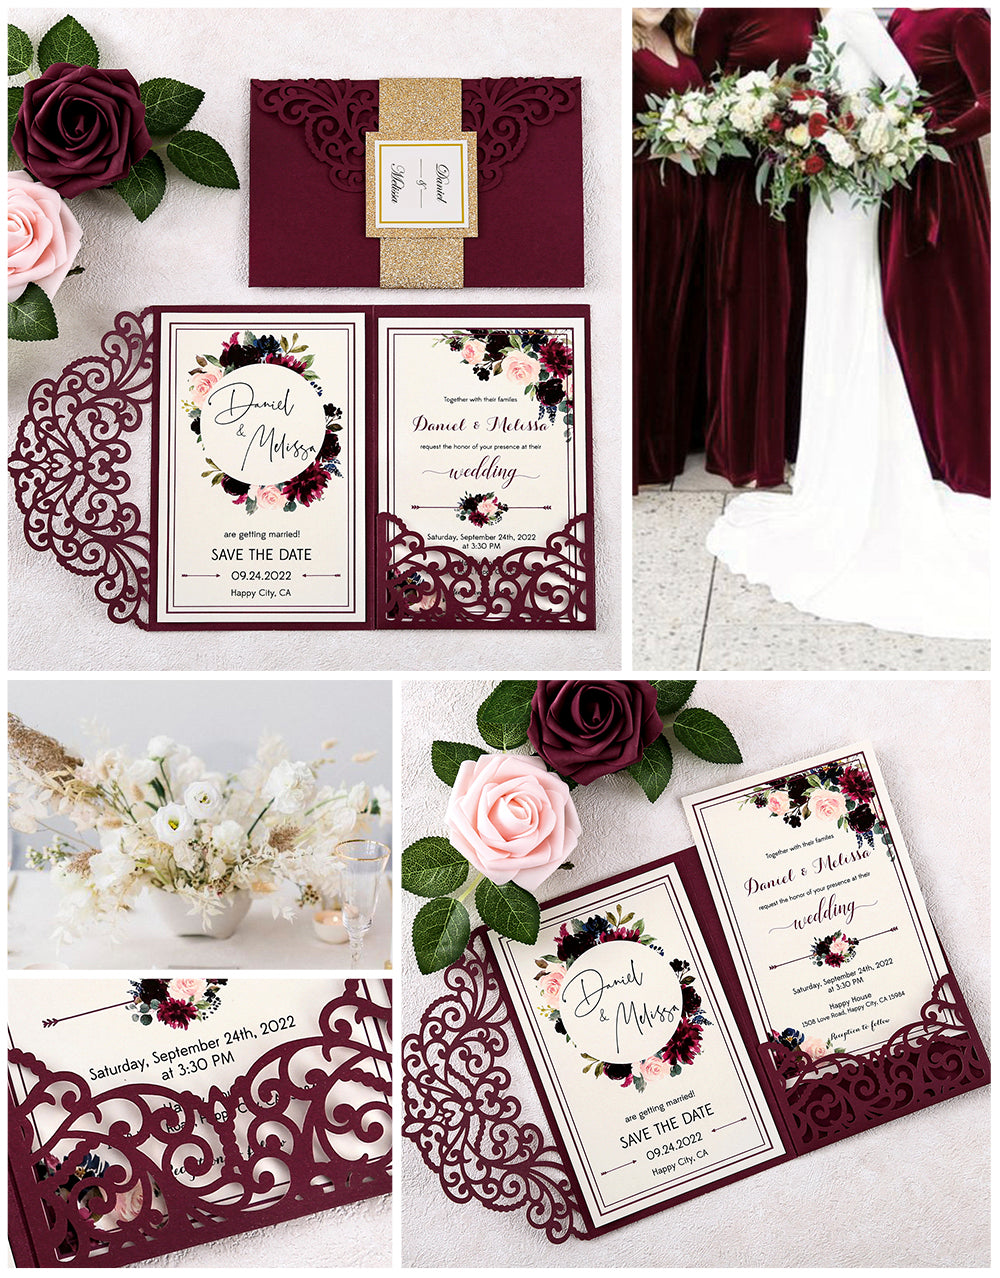 4.7 x7 inch Burgundy Laser Cut Wedding Invitations With Envelopes Kit Hollow Rose Pocket And Gold Glitter Belly Band for Wedding Bridal Shower Engagement Invite